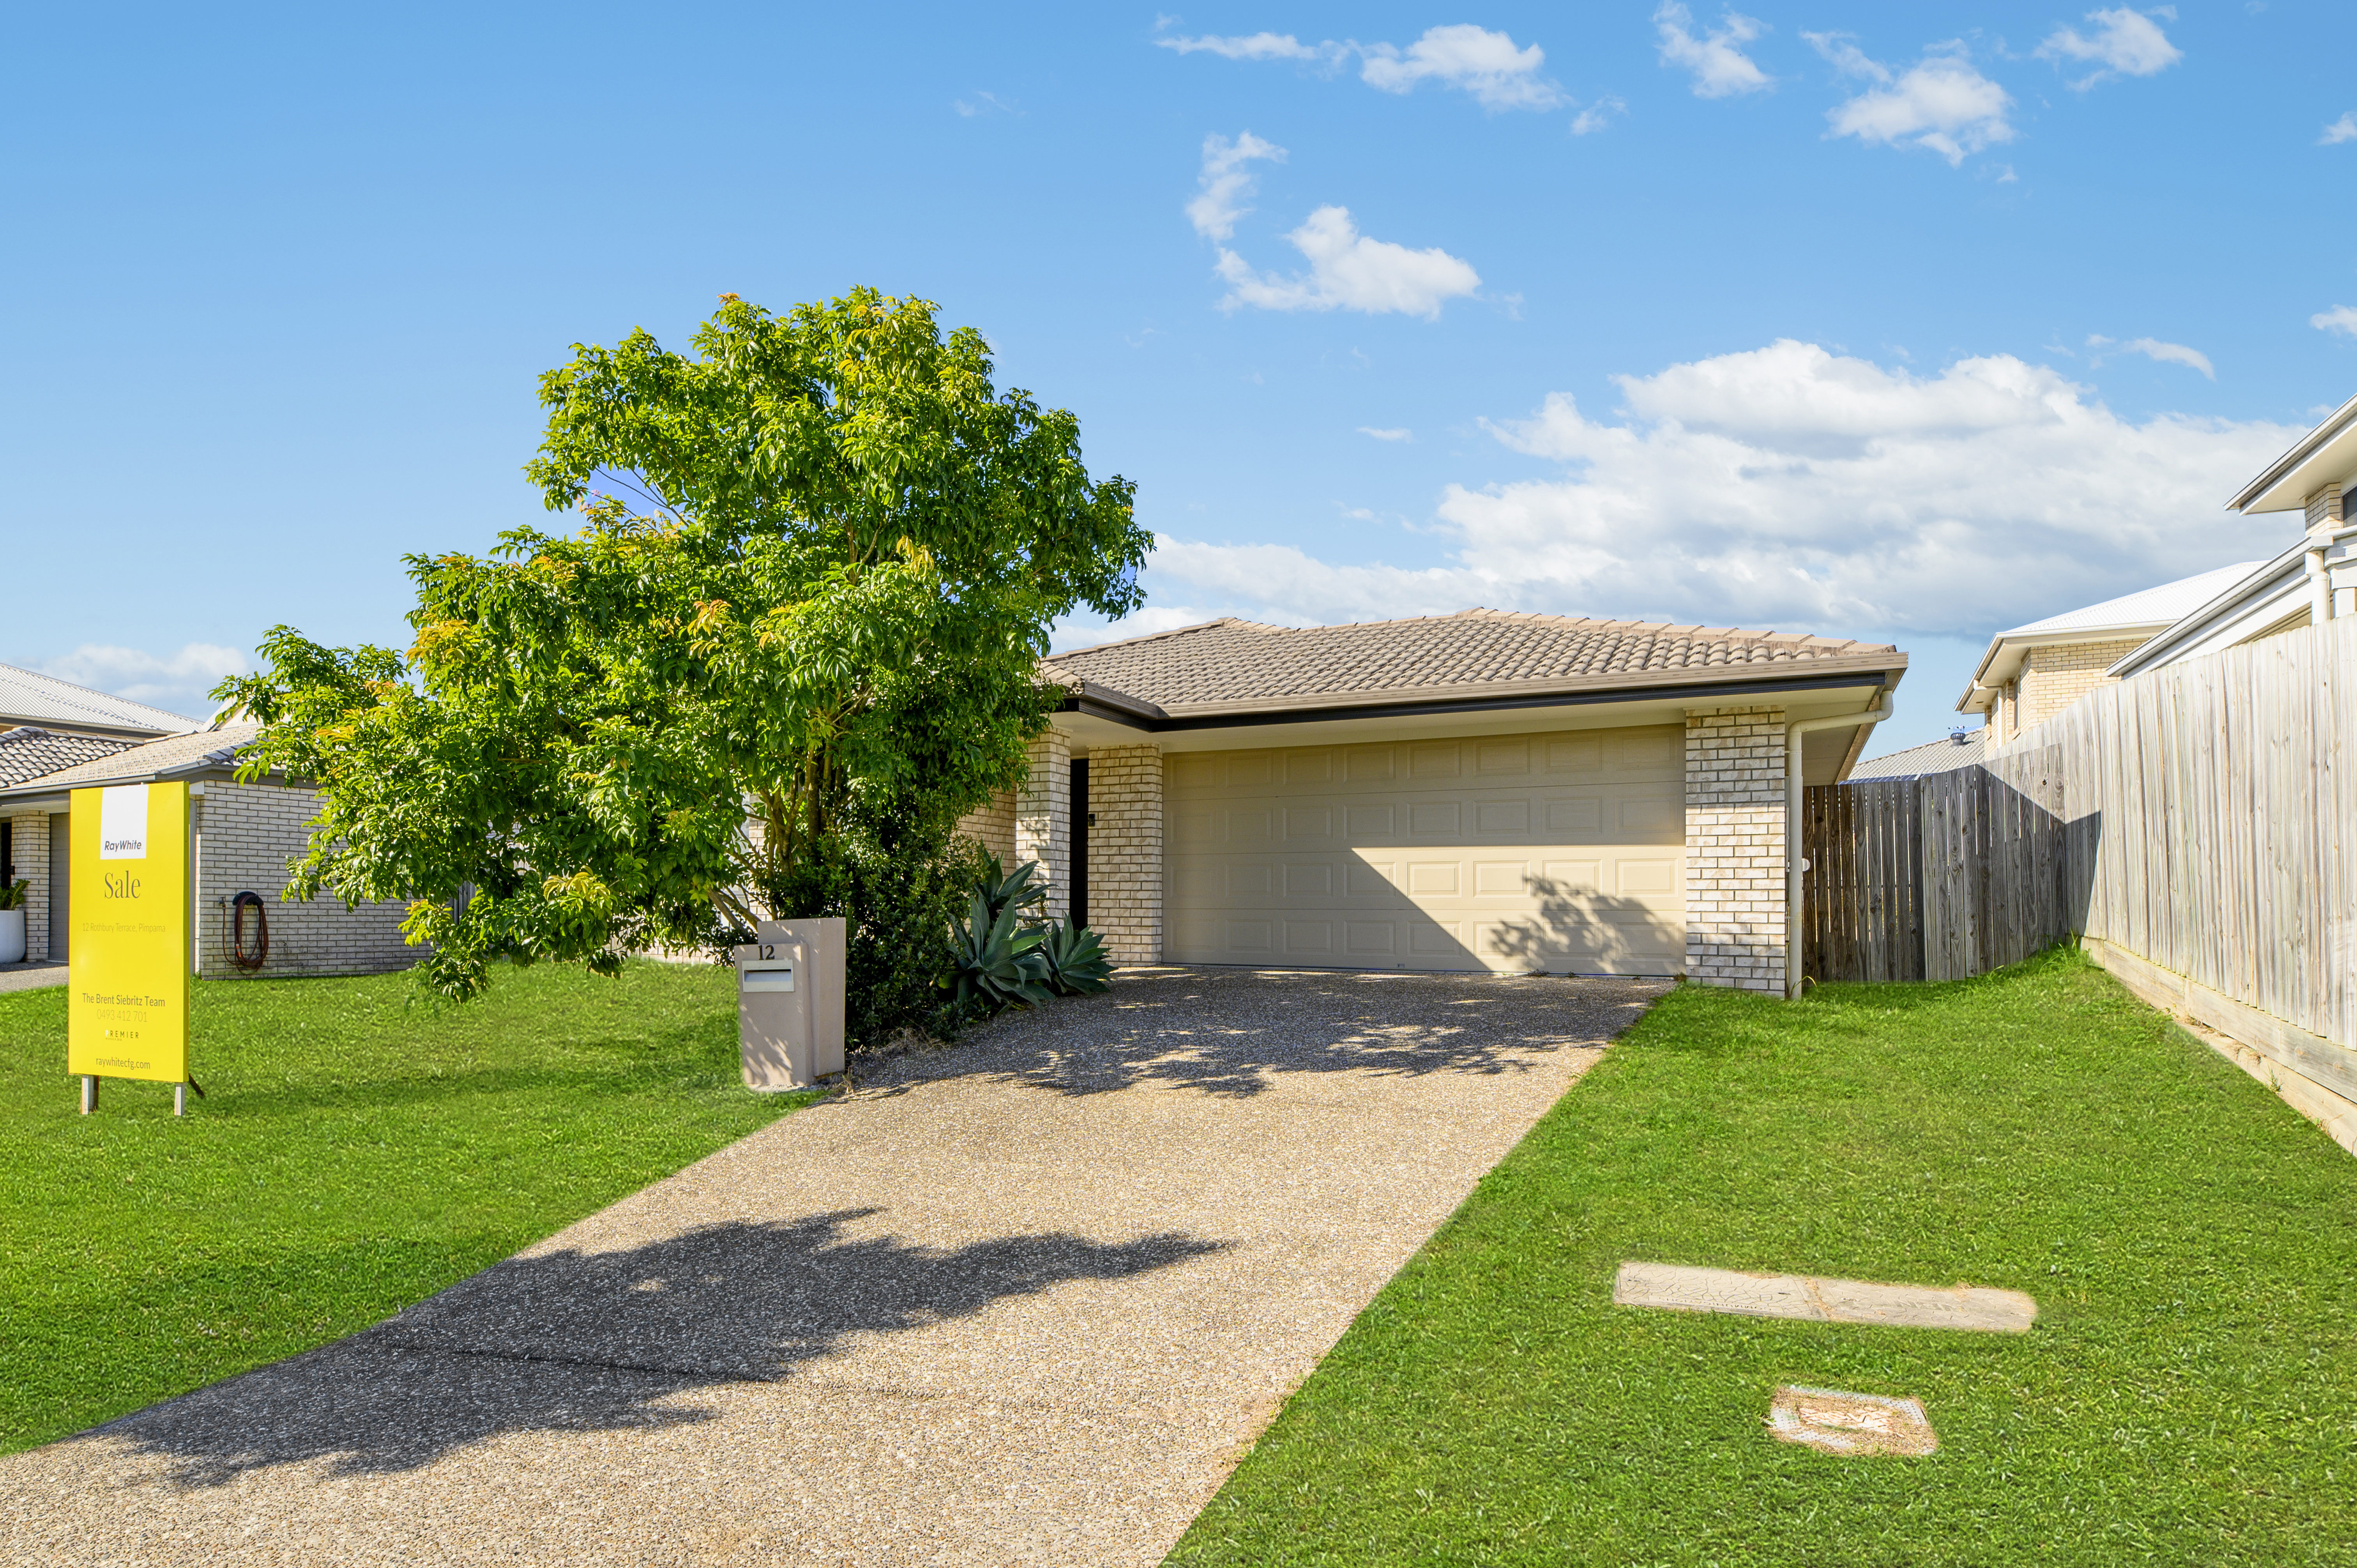 Pimpama 4Zimmer Don't Miss This Stunning Opportunity!